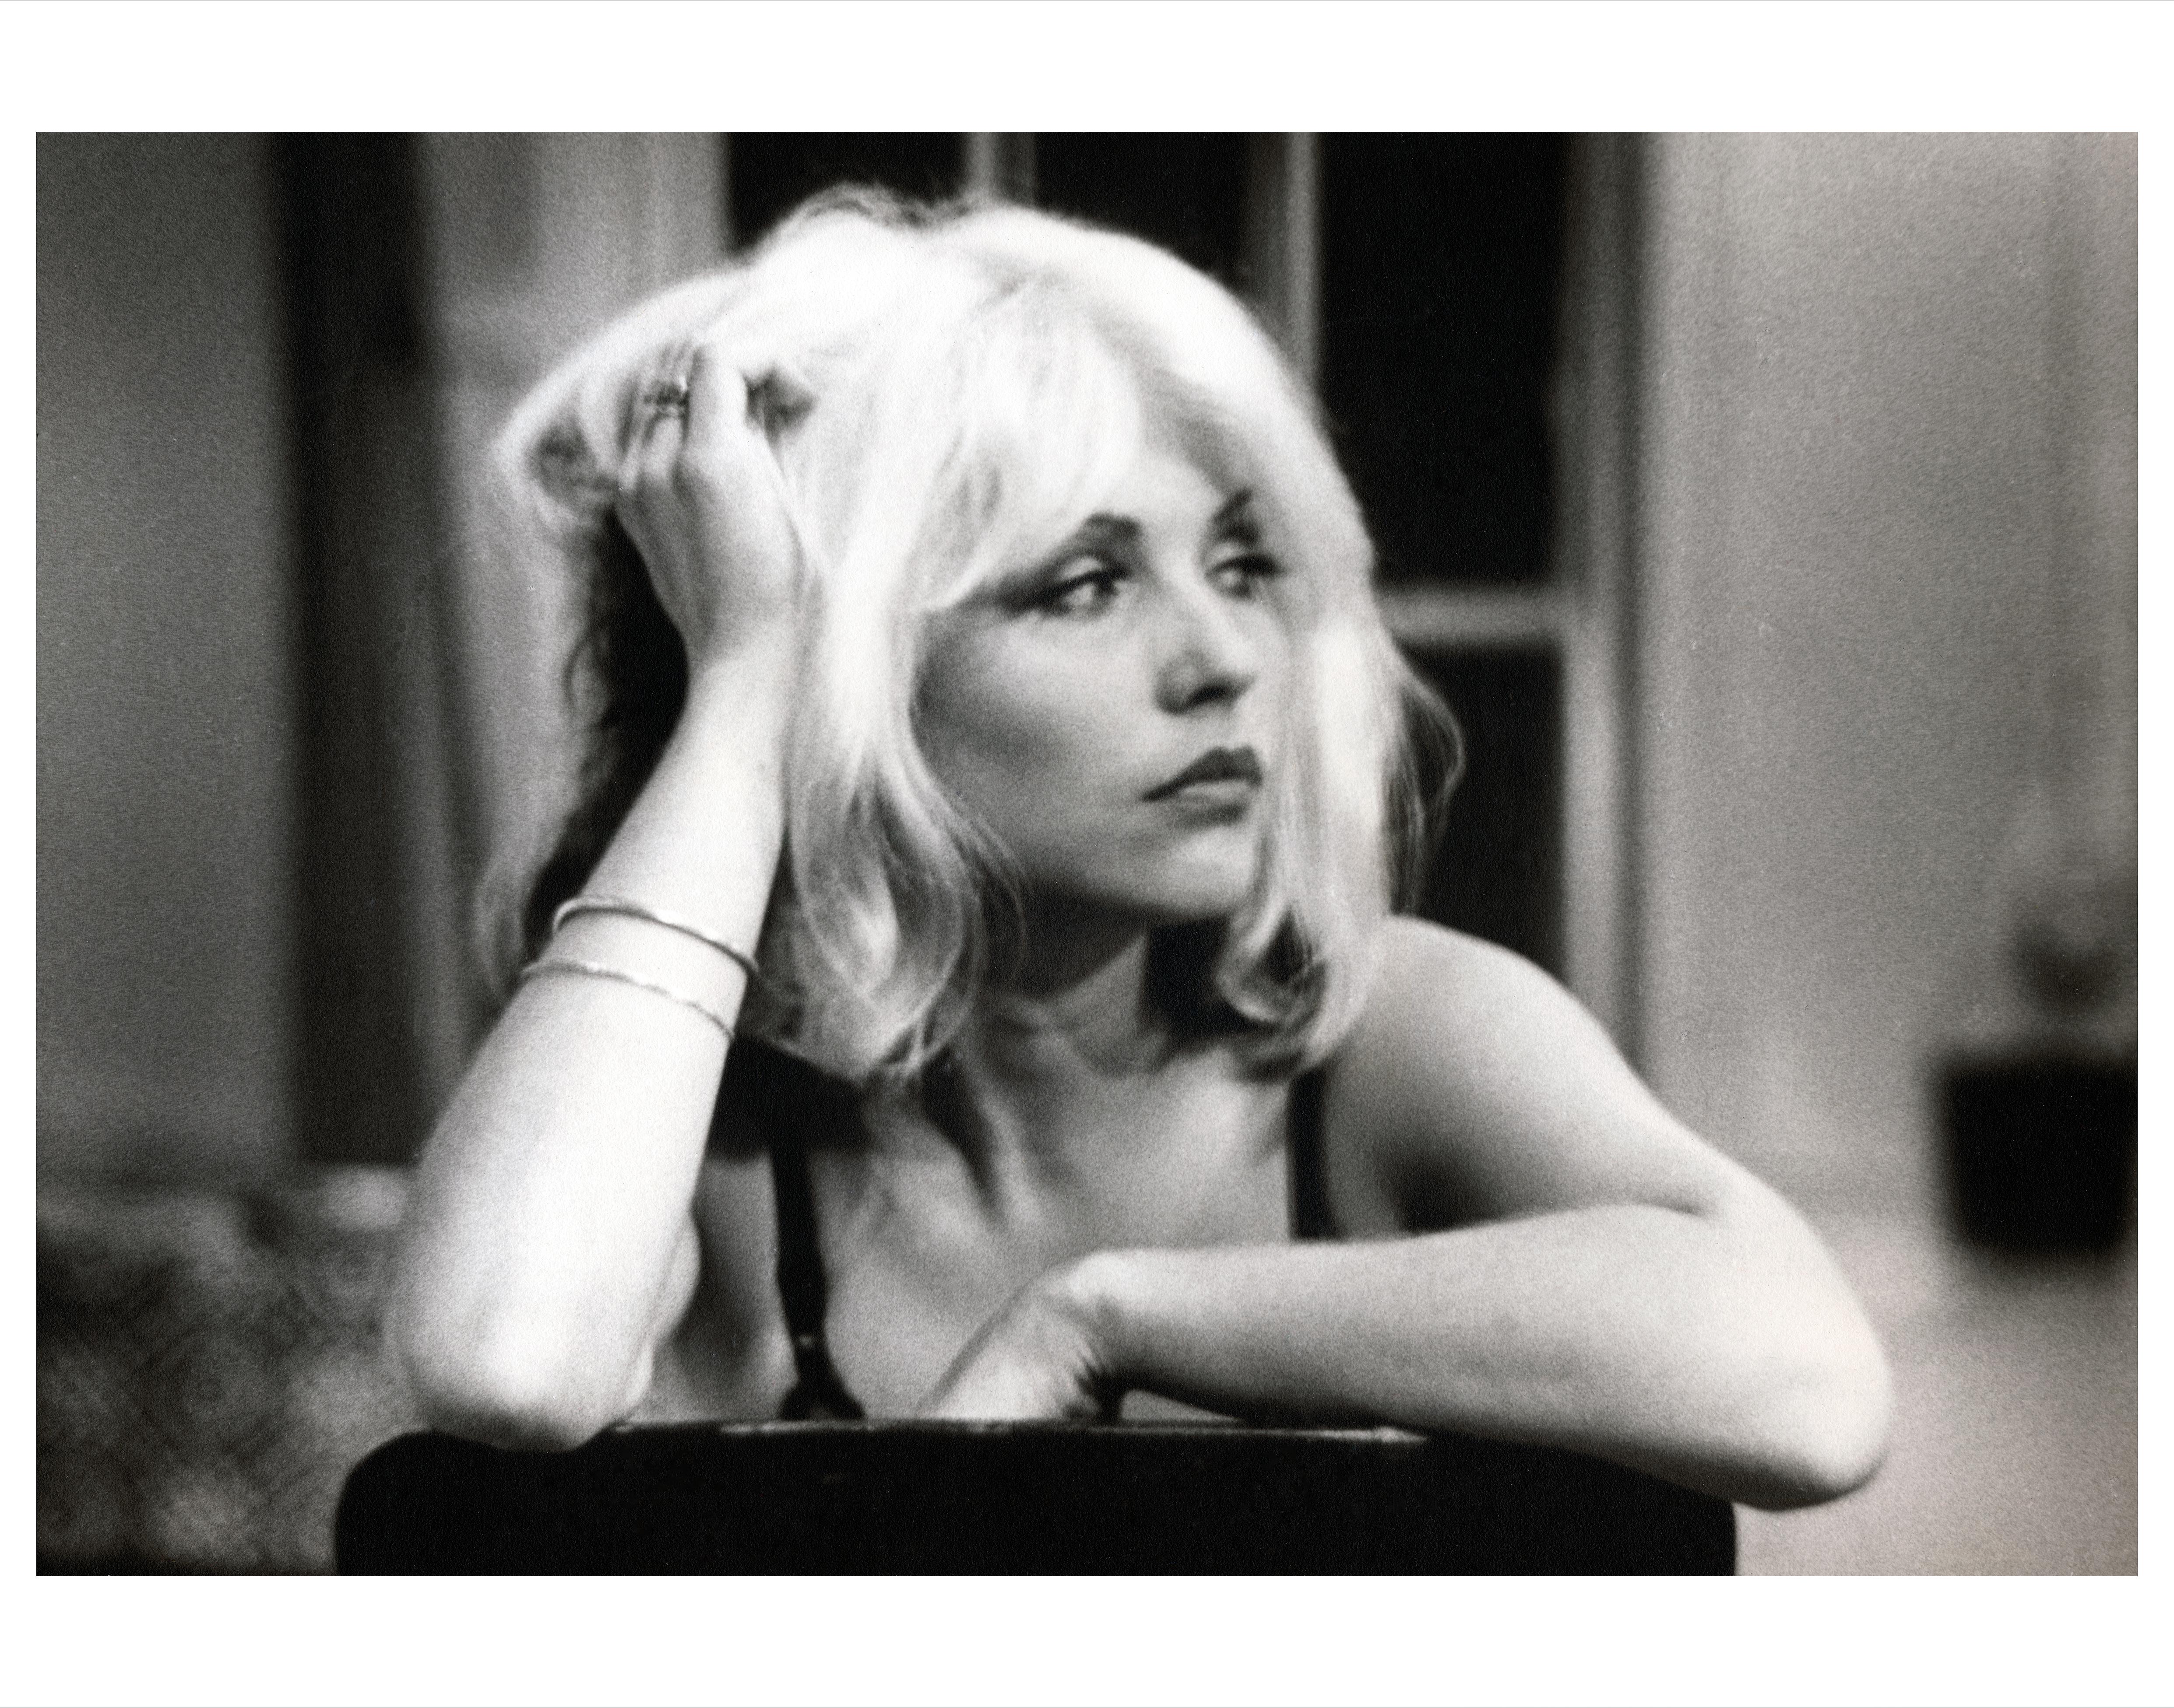 Fernando Natalici Black and White Photograph - Debbie Harry photograph, New York, 1976 (Unmade Beds Blondie)